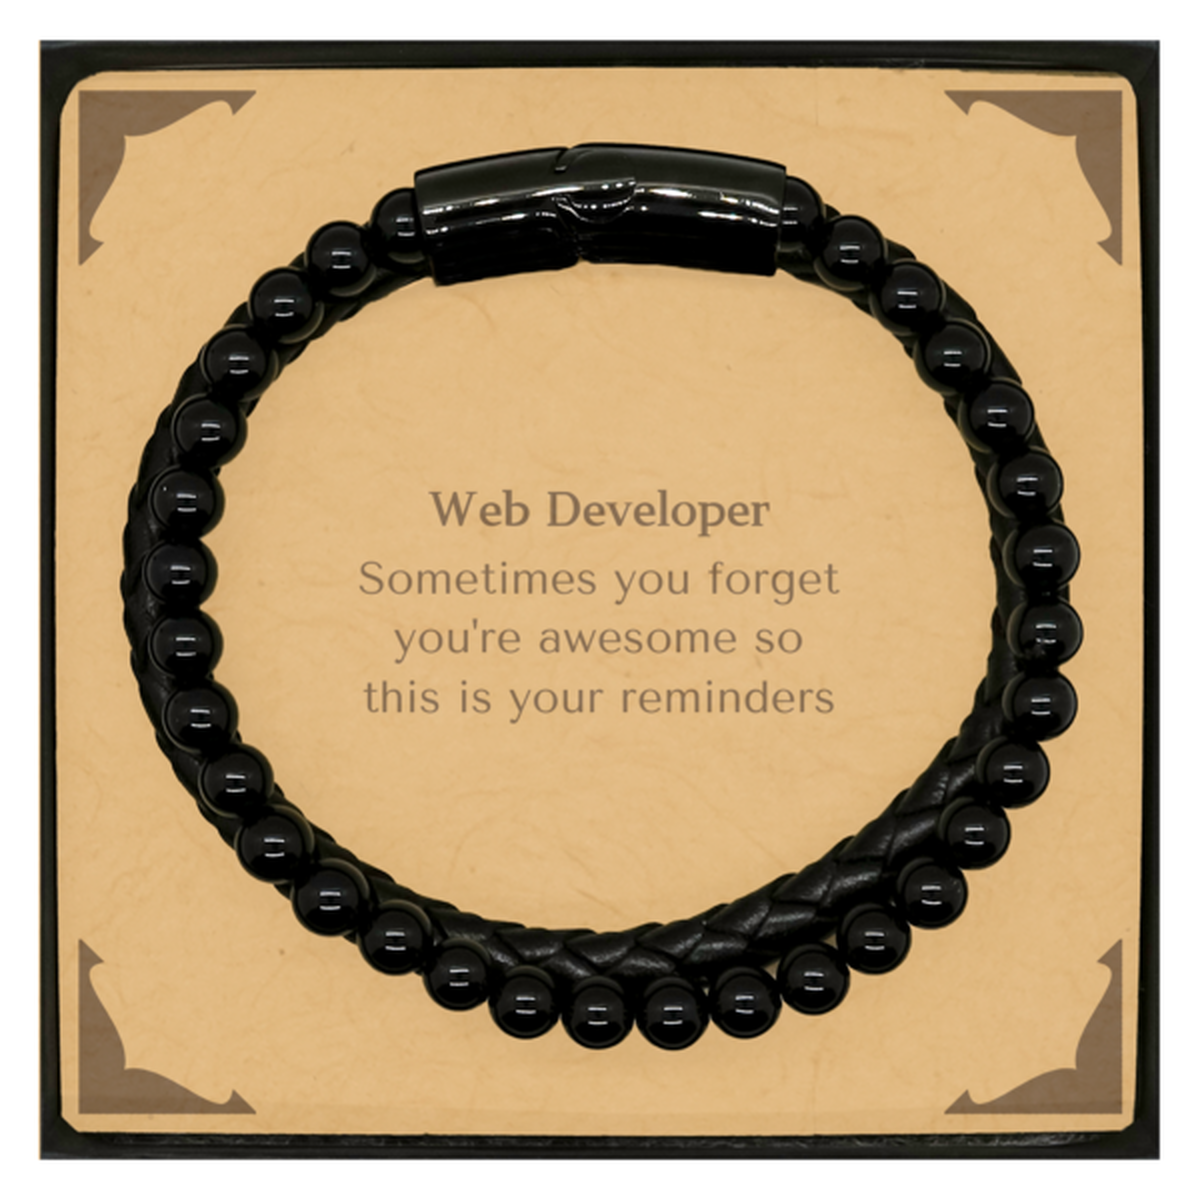 Sentimental Web Developer Stone Leather Bracelets, Web Developer Sometimes you forget you're awesome so this is your reminders, Graduation Christmas Birthday Gifts for Web Developer, Men, Women, Coworkers